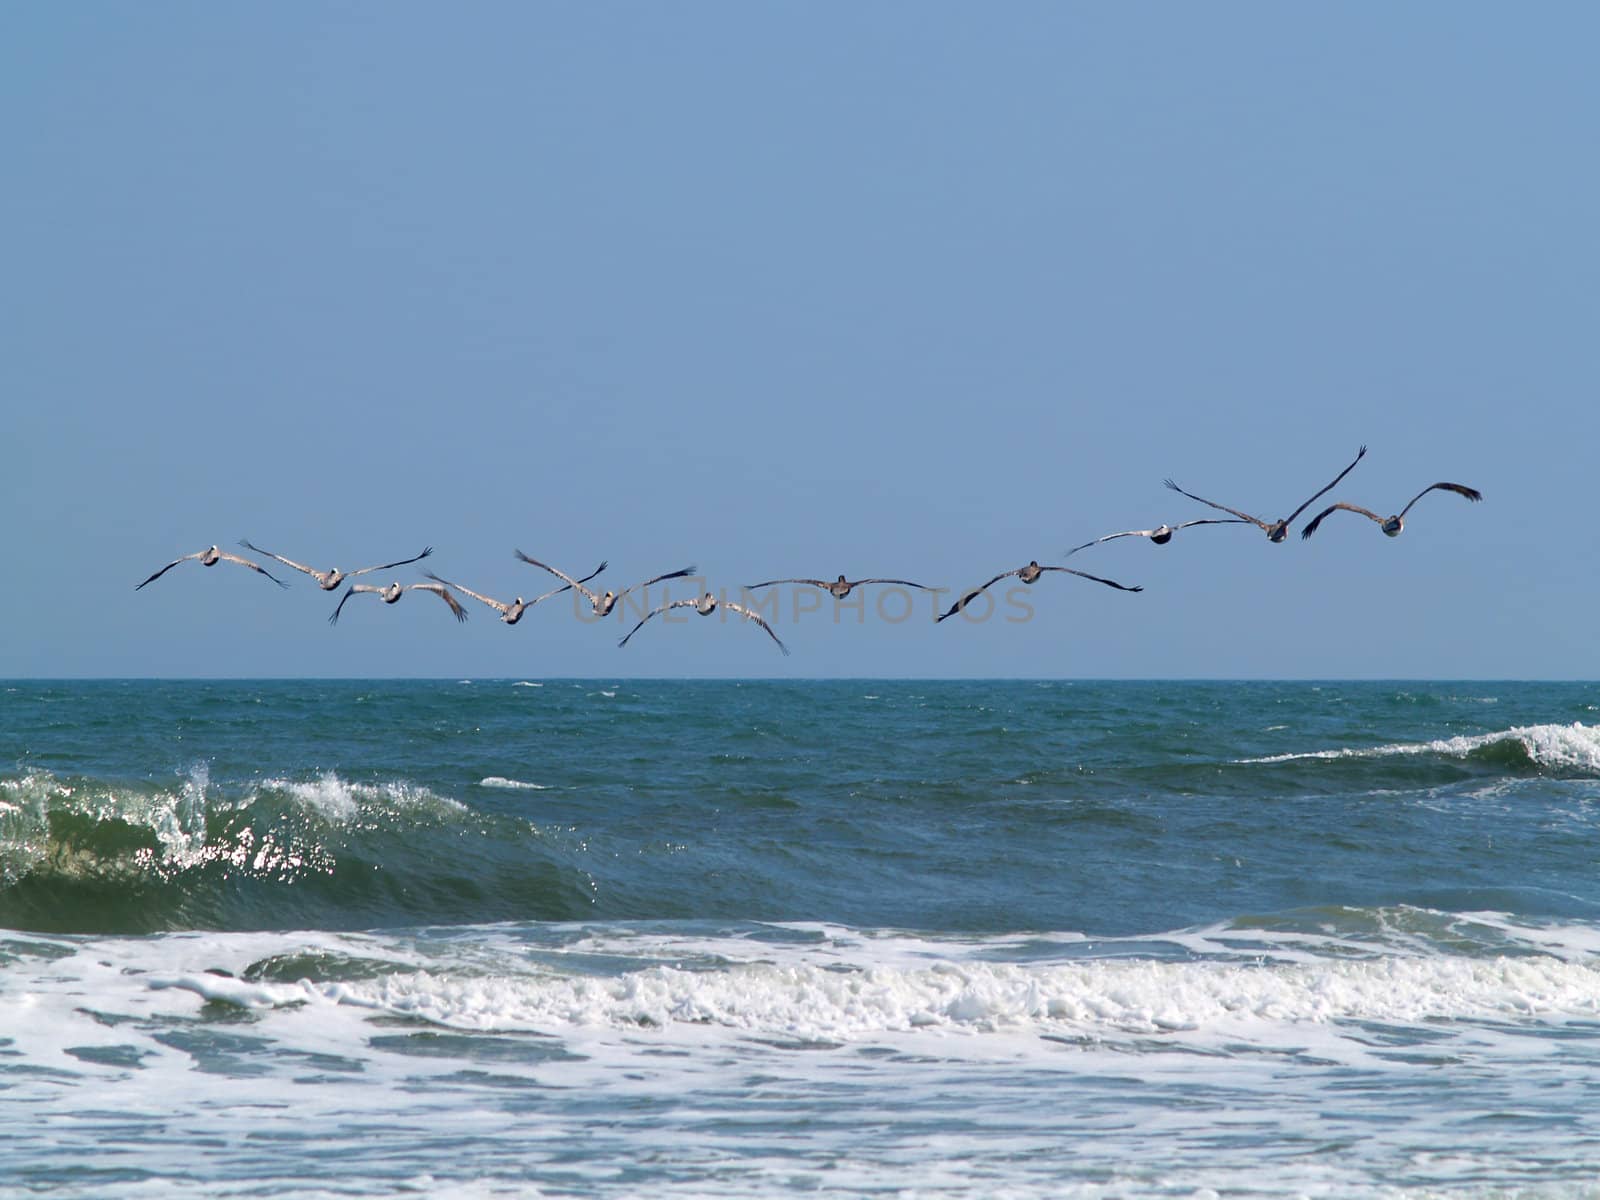 Eleven pelicans flying away in formation over the surf